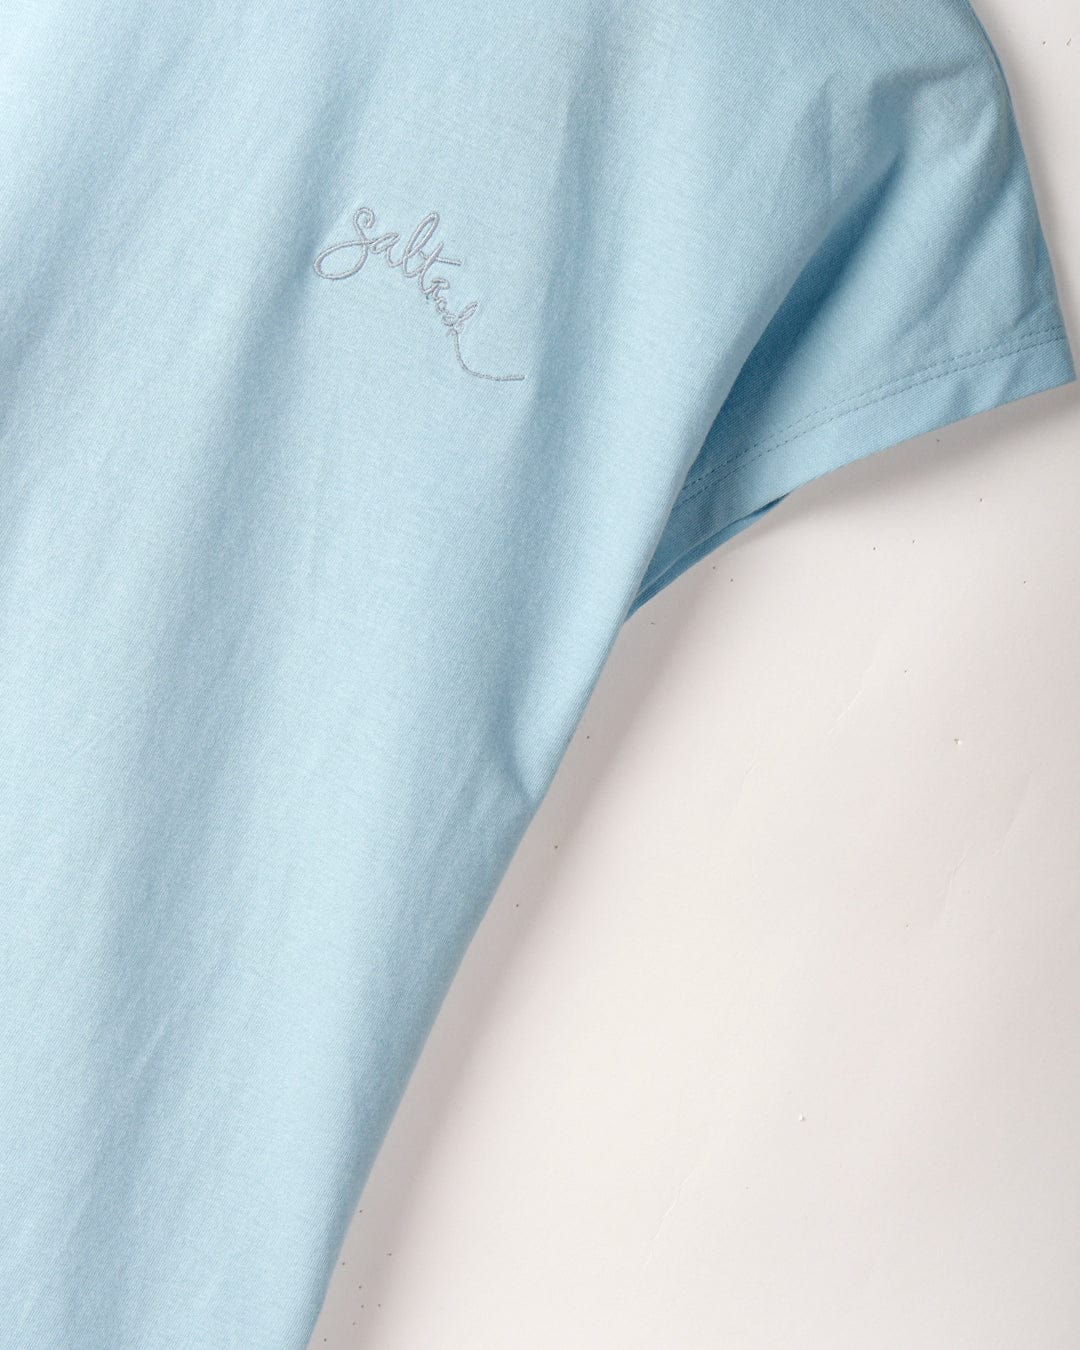 Close-up of a light blue T-shirt sleeve with the word 